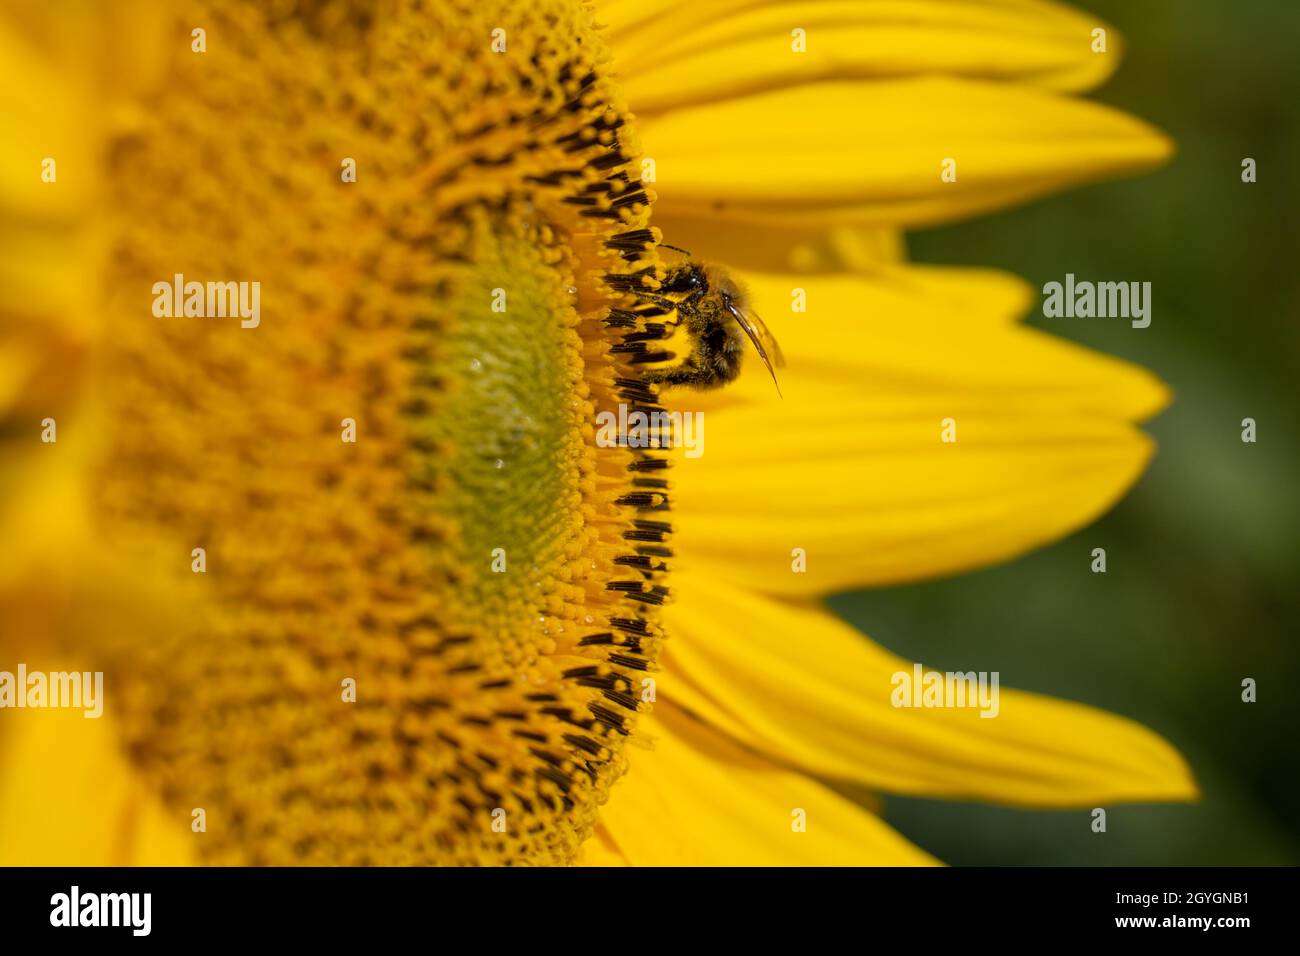 Honey bee sucking out the nectar from a sunflower Stock Photo